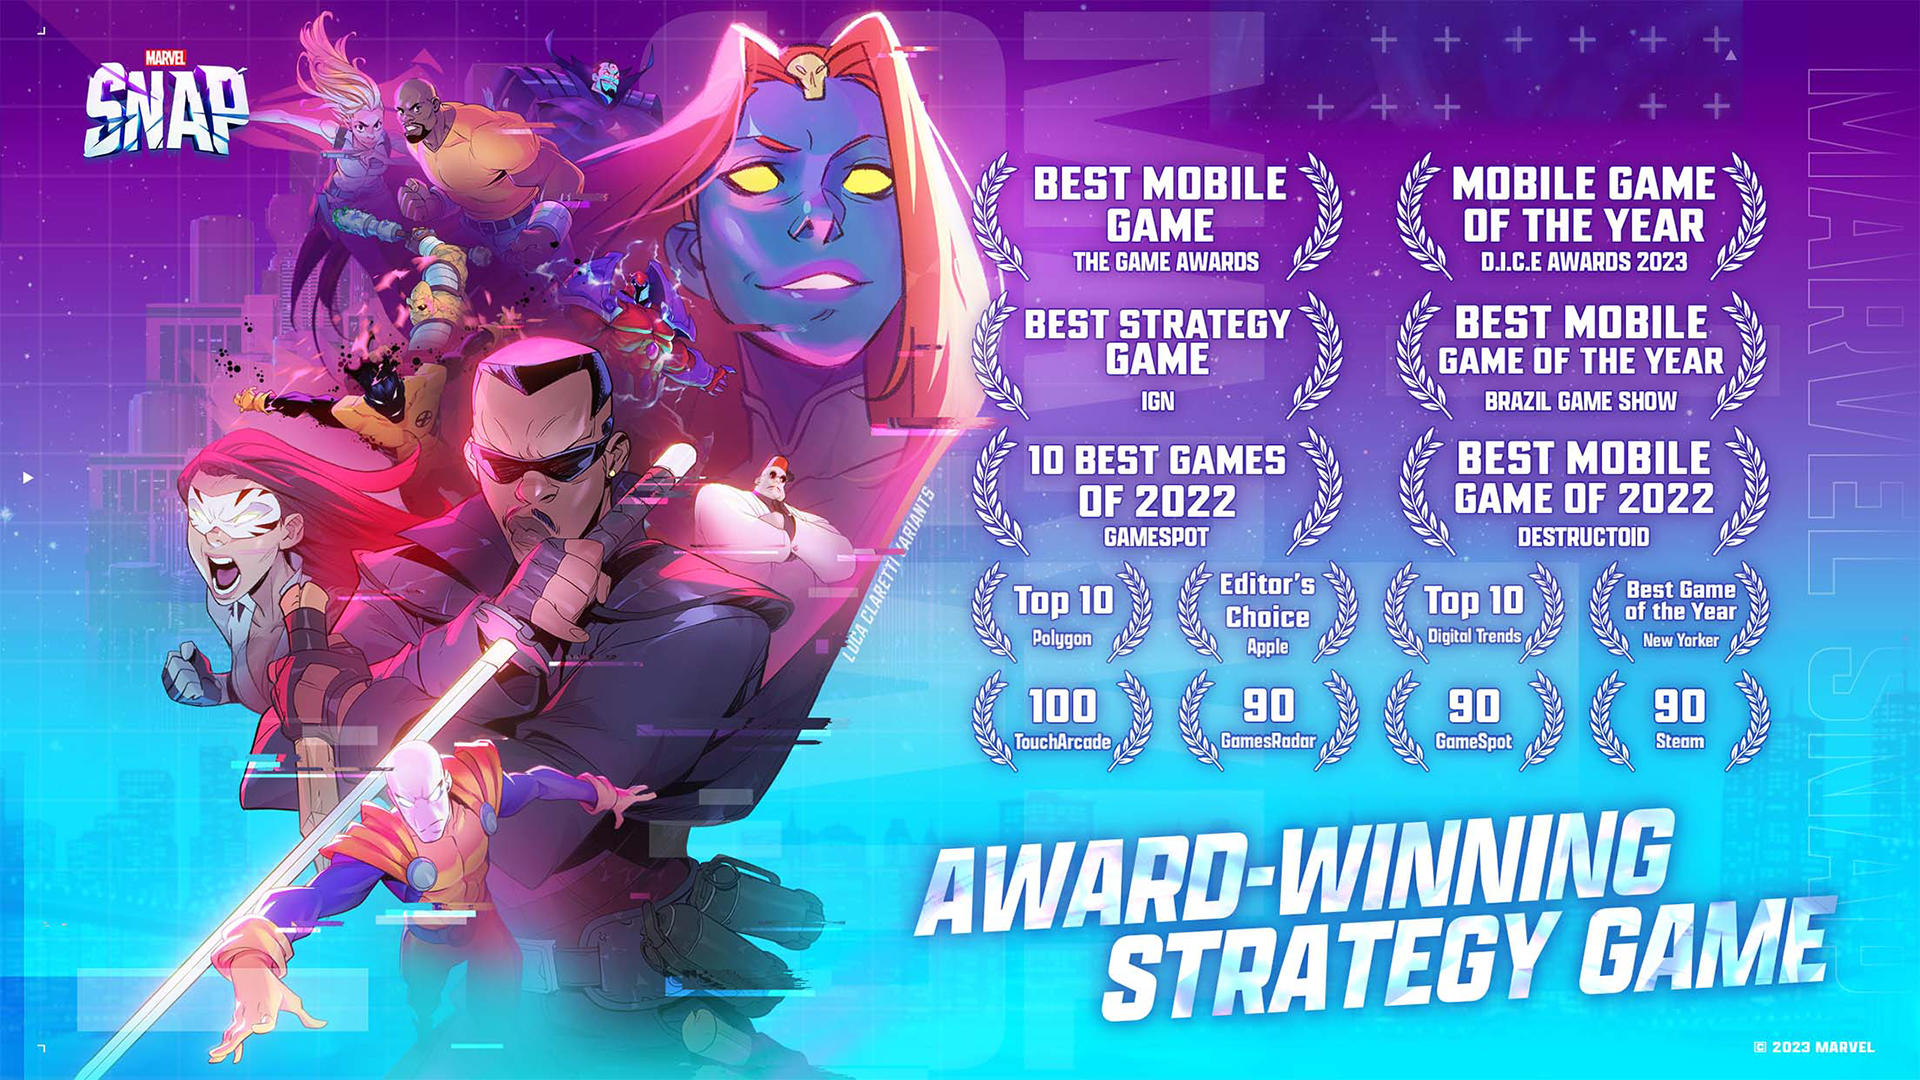 Marvel Snap is an epic new multiverse card game for iPhone and Android